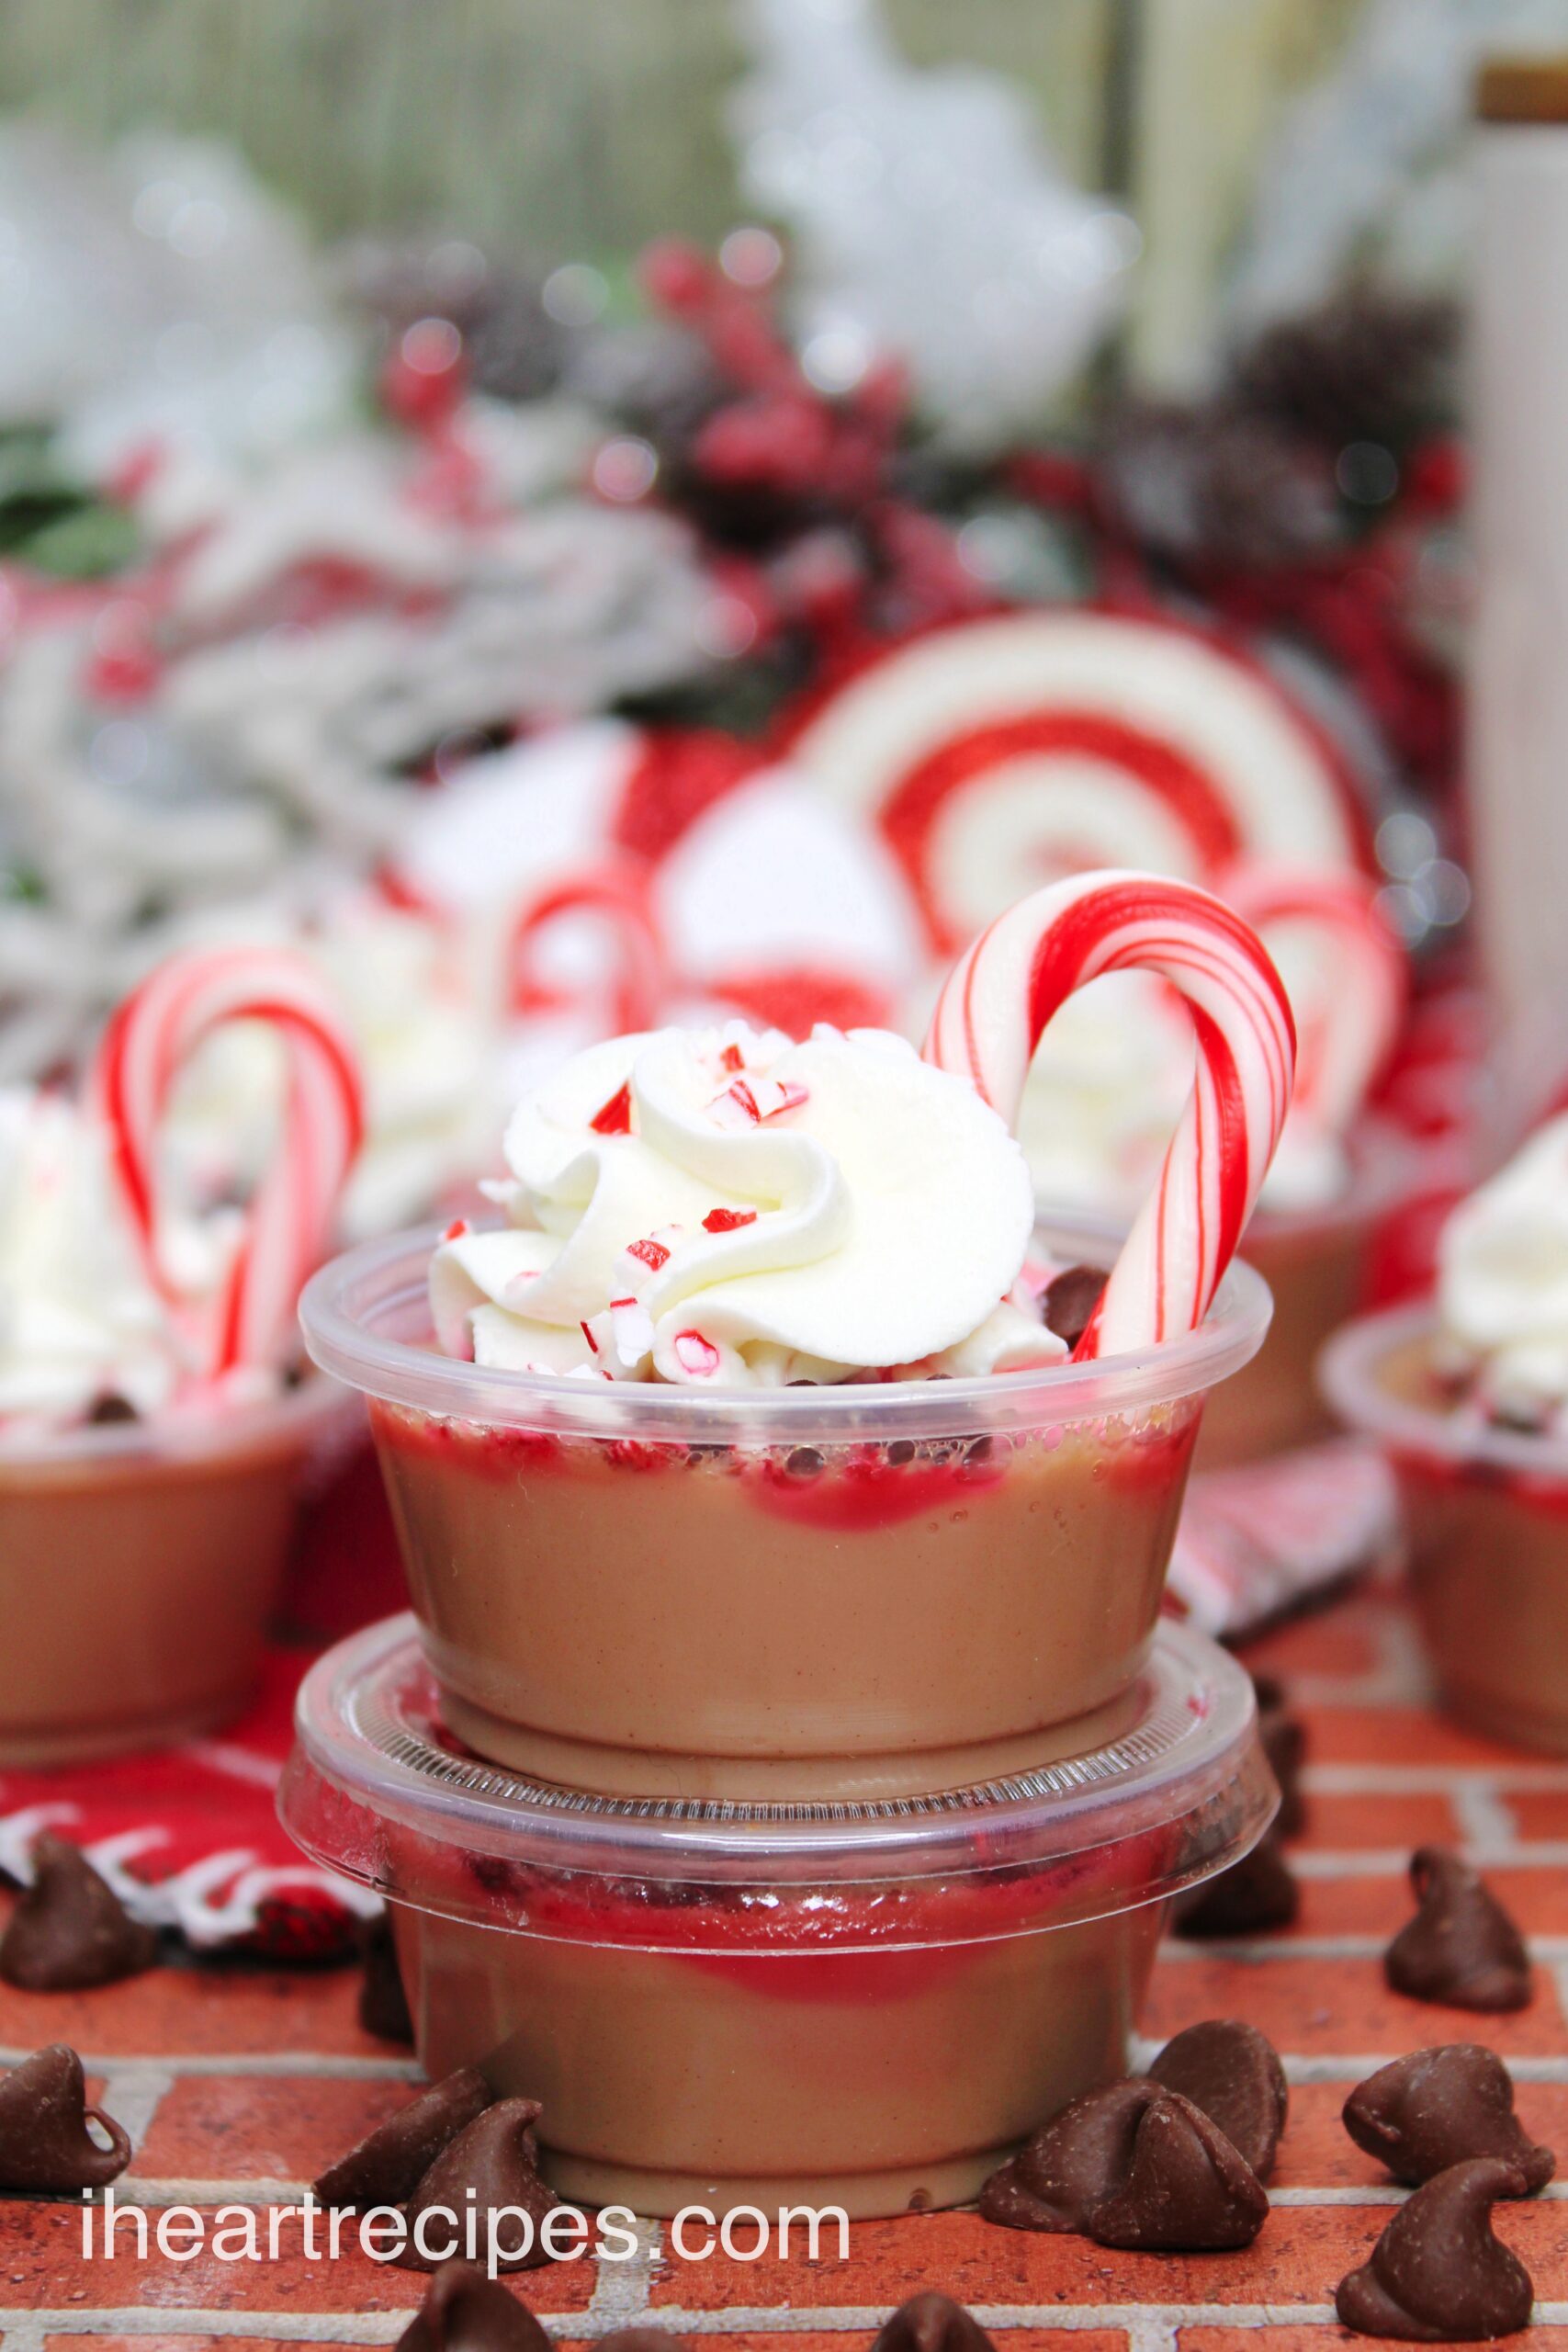 A close-up image of peppermint and chocolate Jello shots. Two are stacked on top of each other in little cups, garnished with whipped cream, mini candy canes, and chocolate chips.